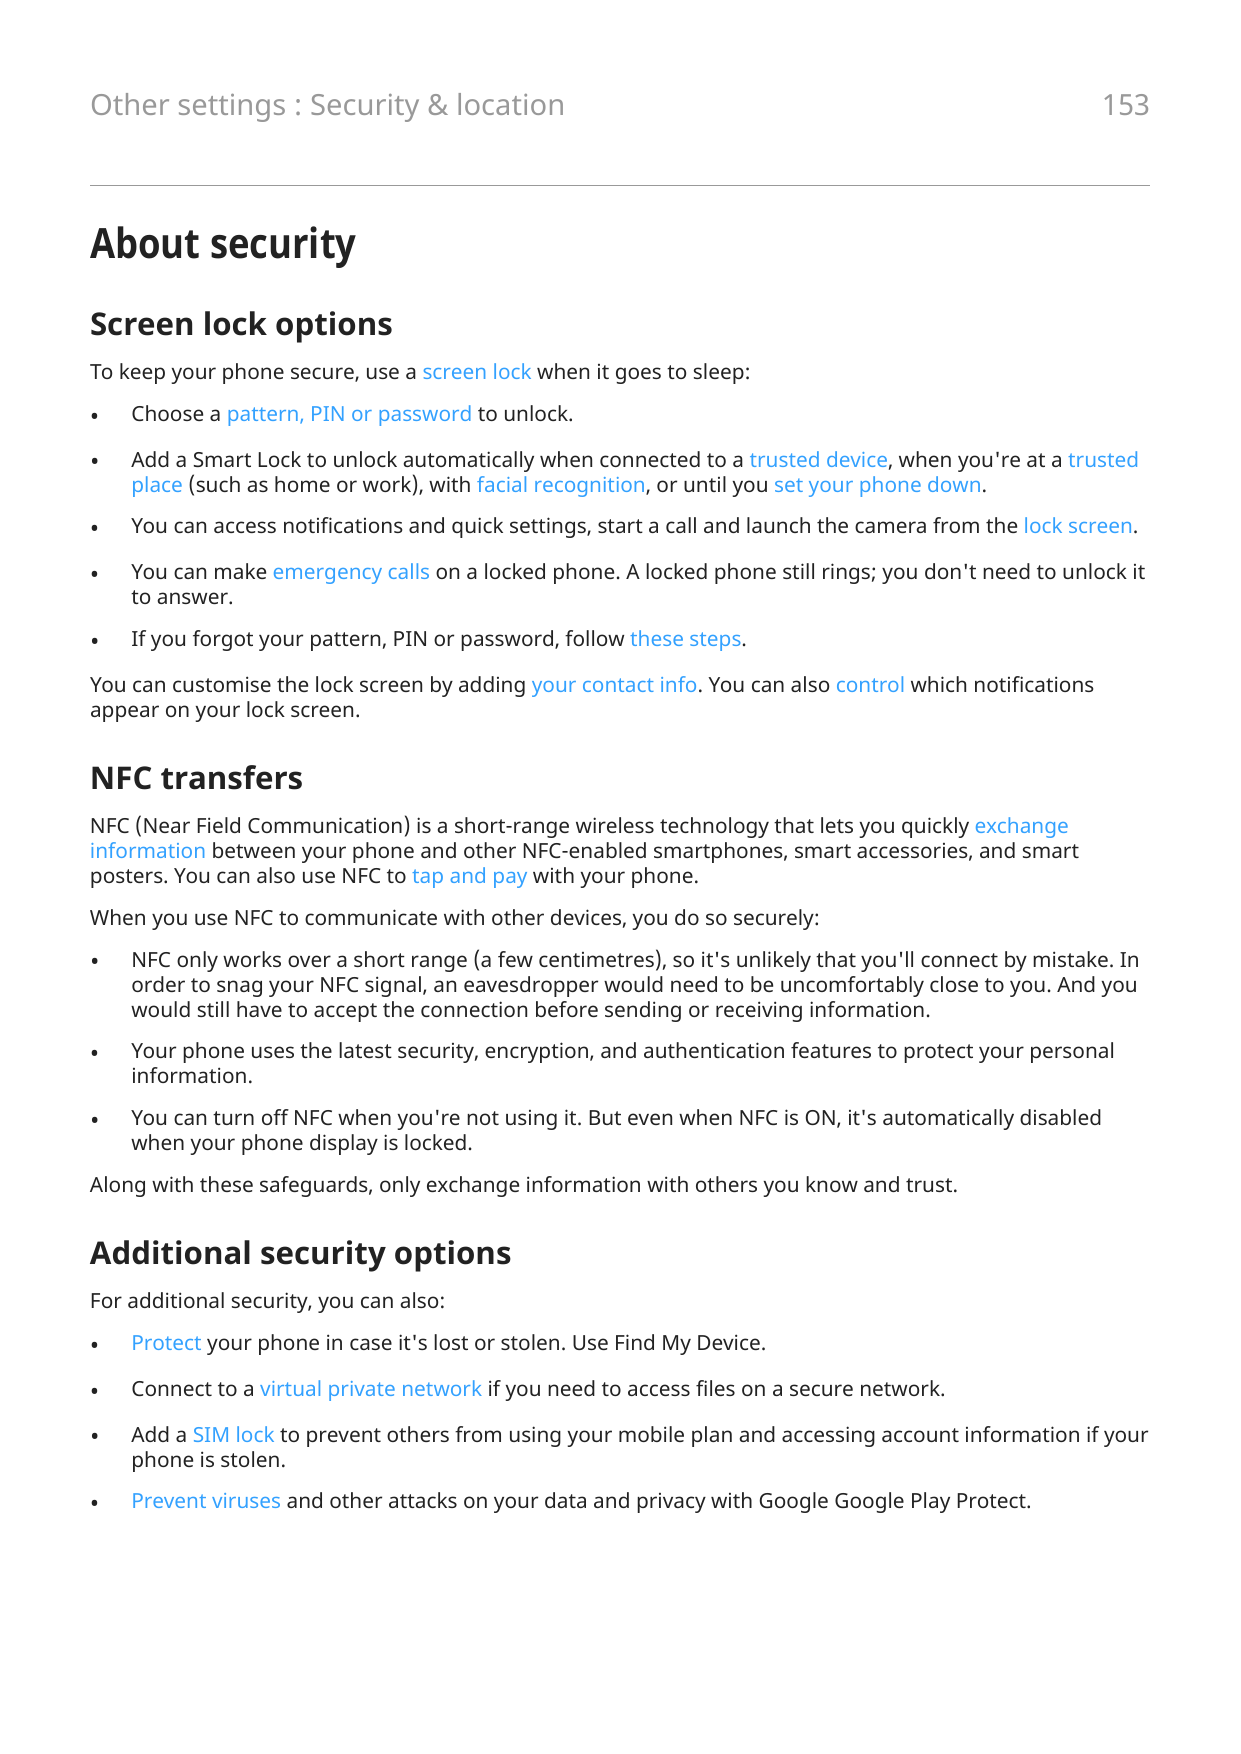 Other settings : Security & location153About securityScreen lock optionsTo keep your phone secure, use a screen lock when it goe